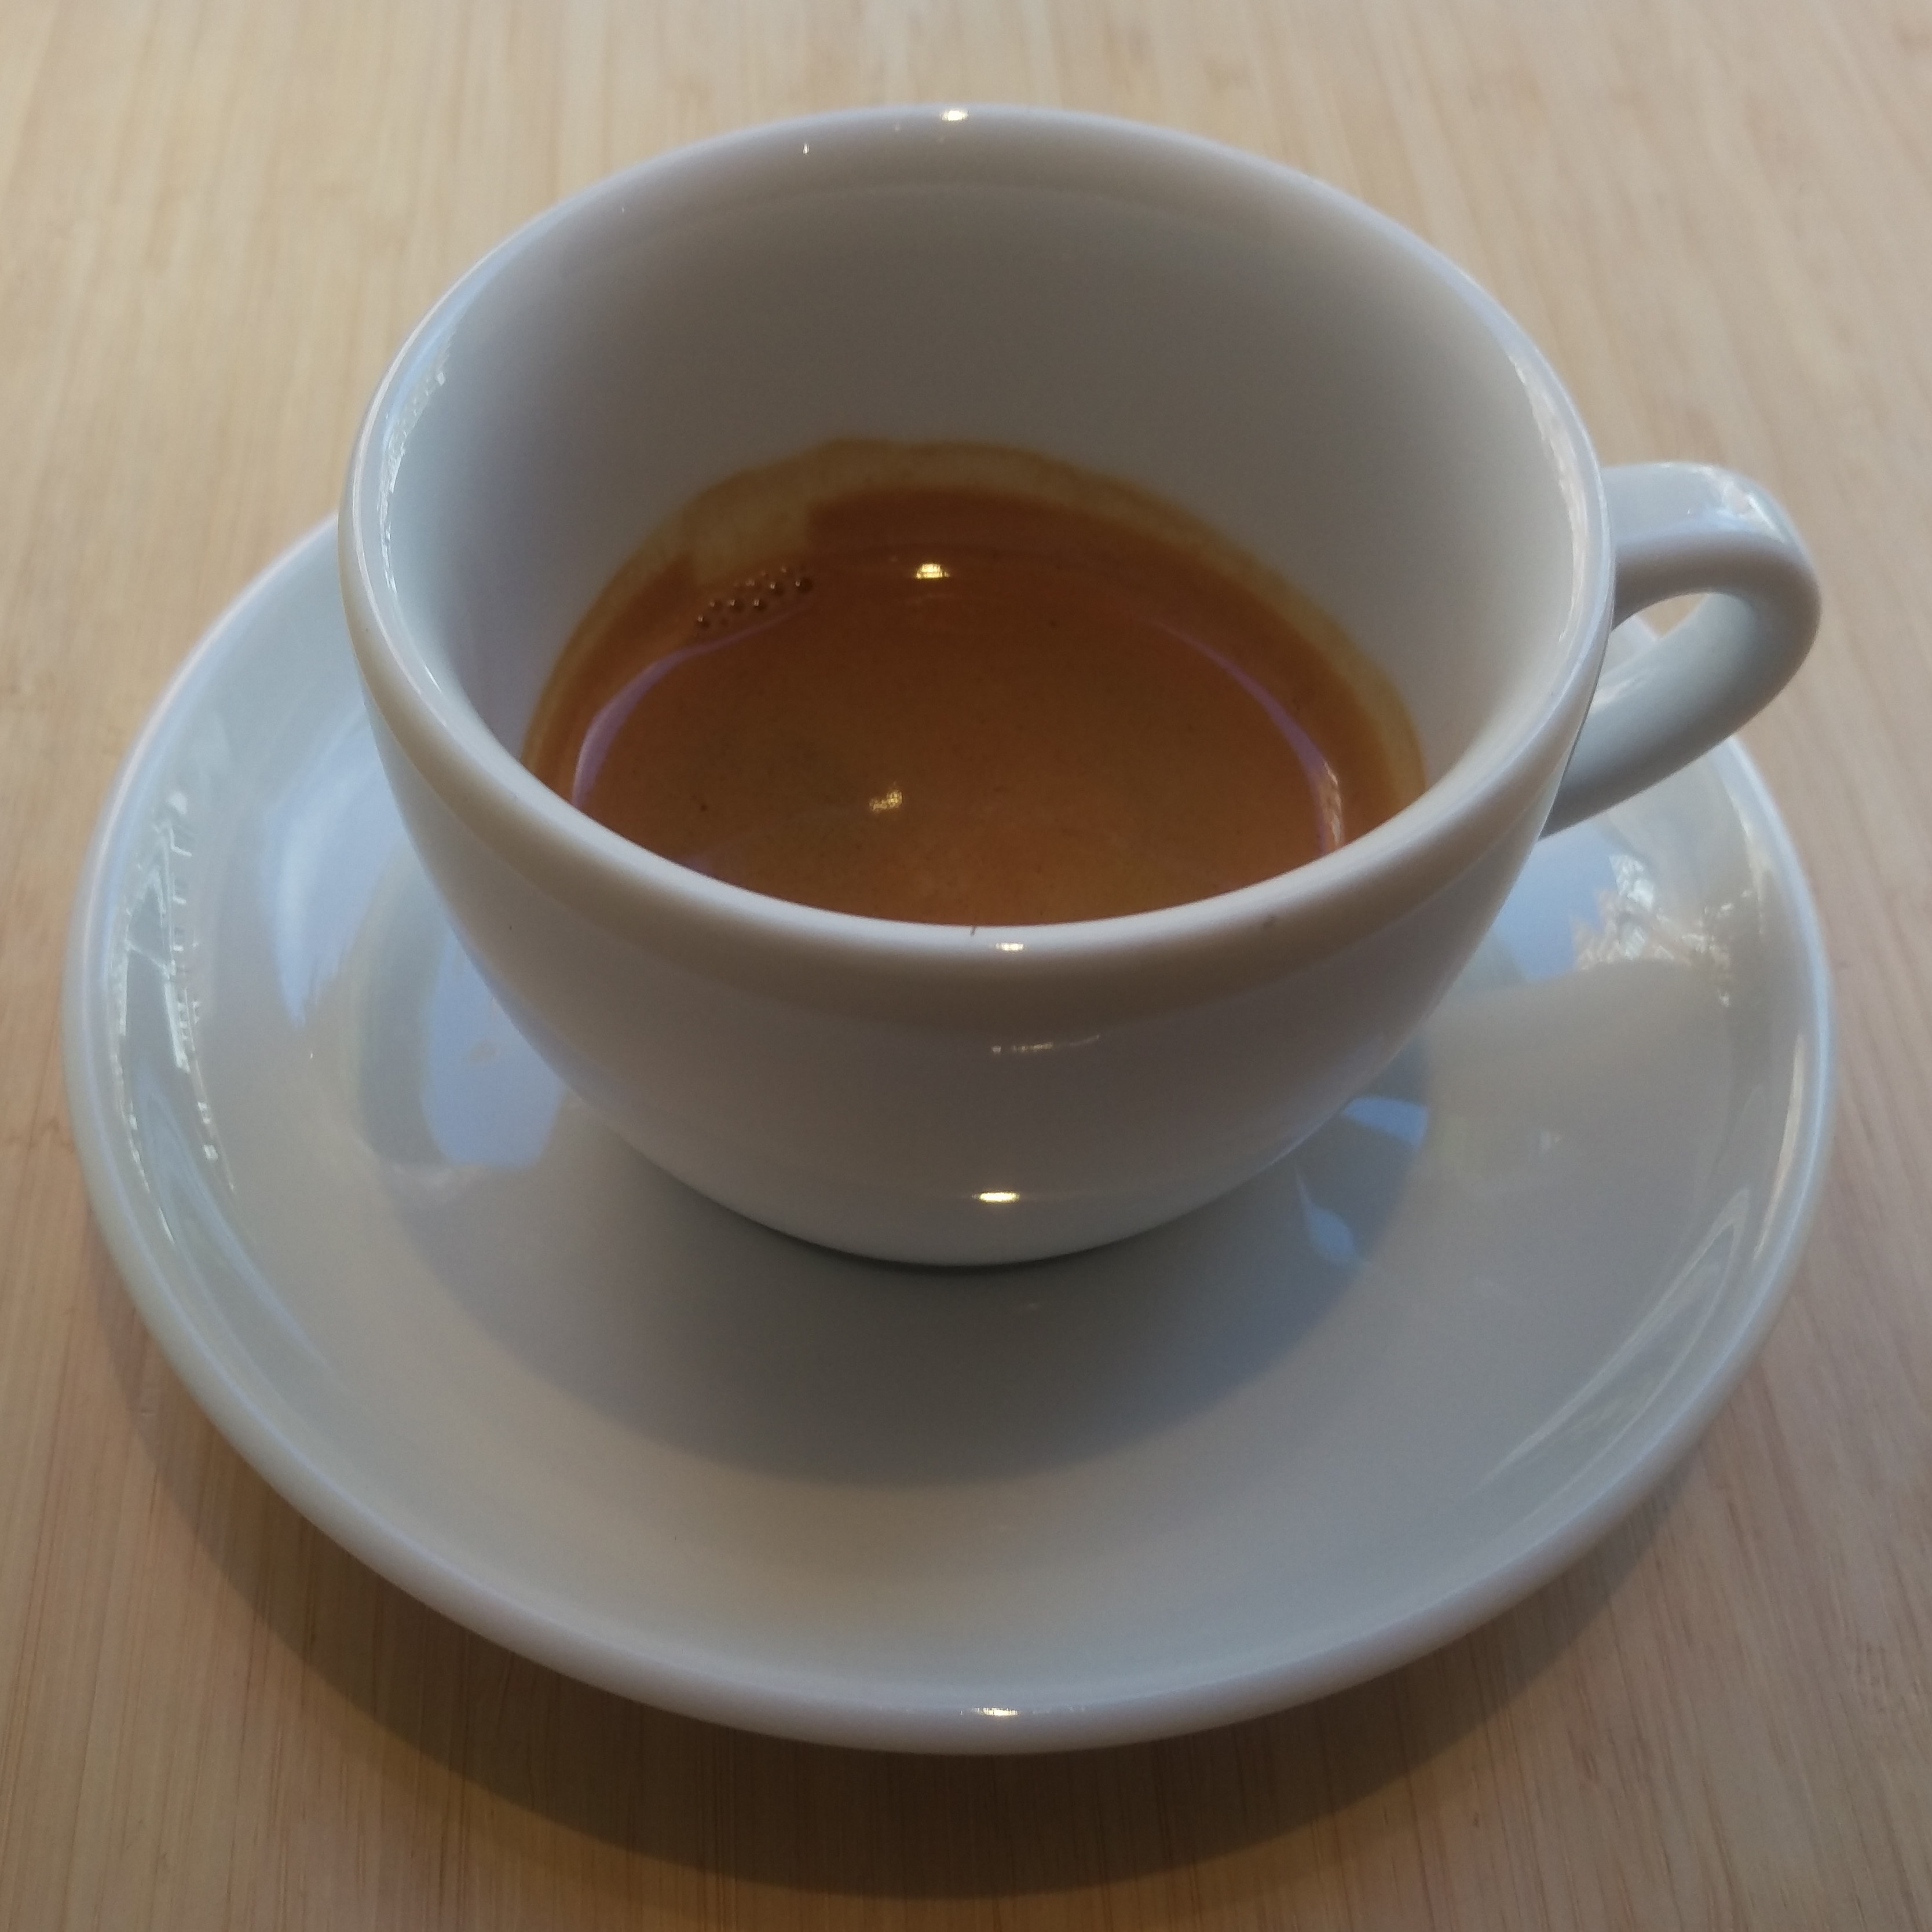 The single-origin Brazilian espresso from Red Bank Coffee served in an over-sized, classic white cup at Alex Coffee.